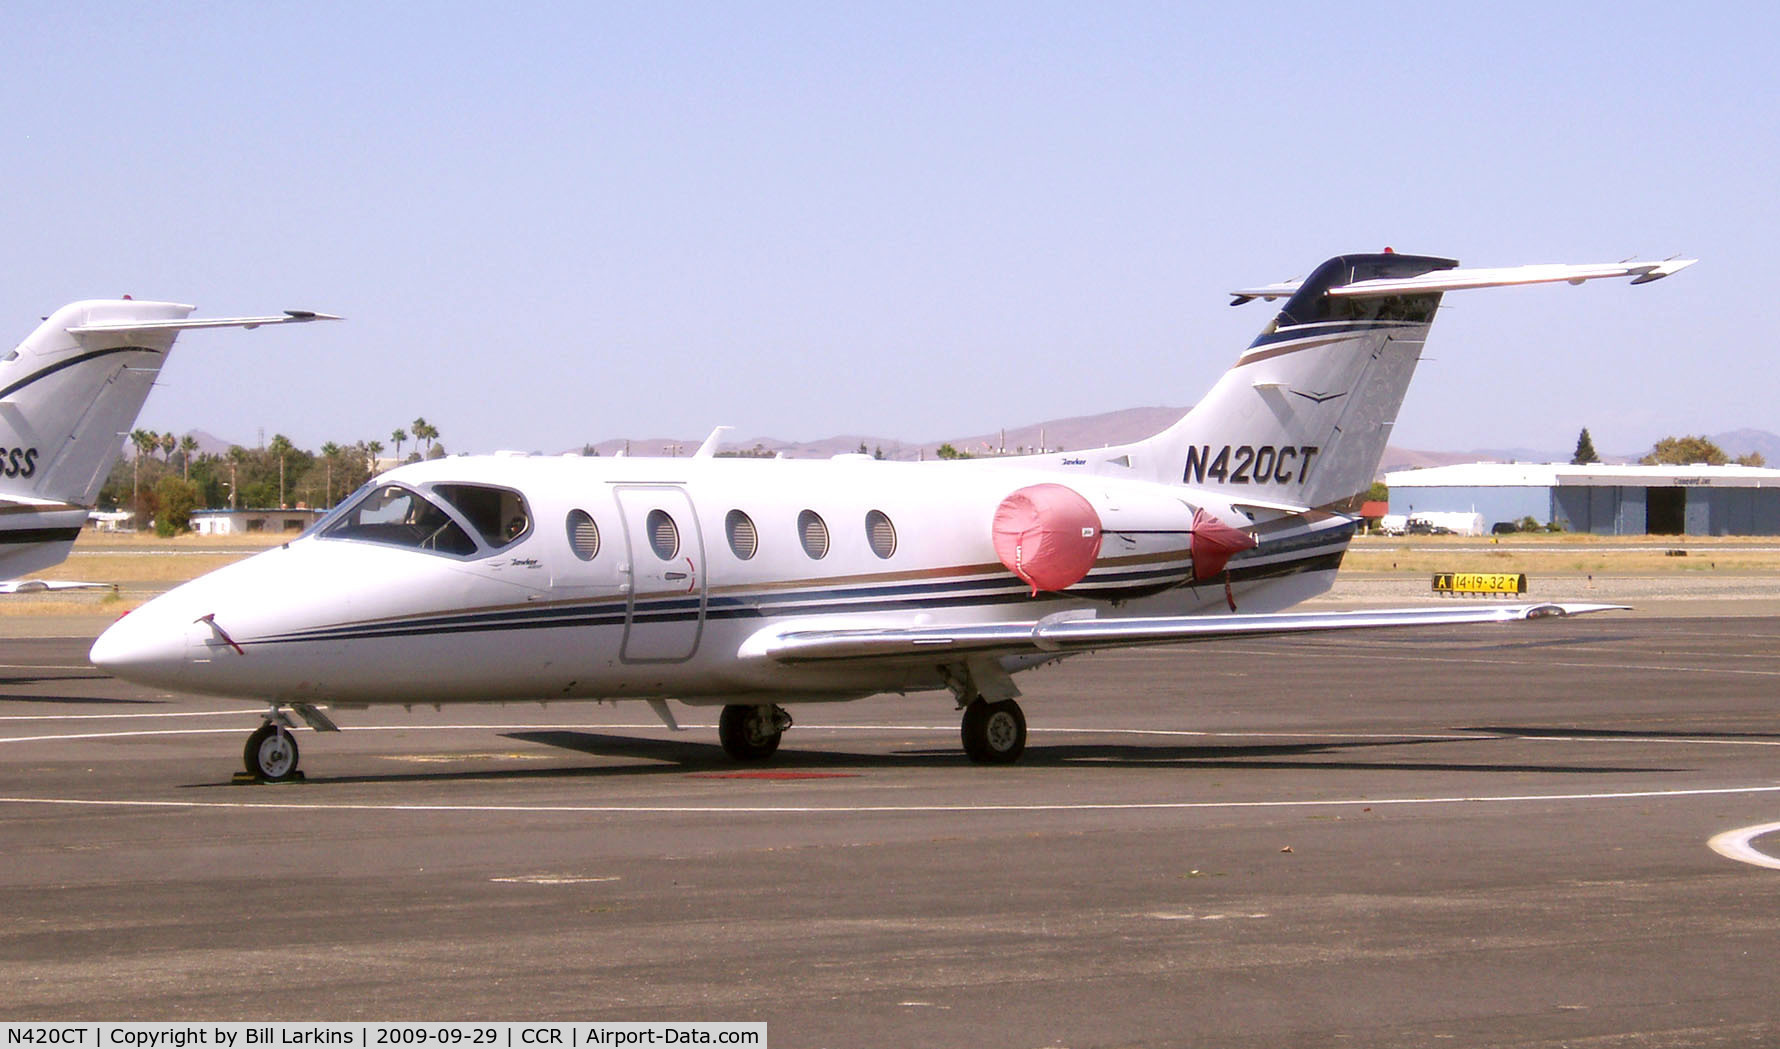 N420CT, 2007 Raytheon Beechjet 400A C/N RK-517, Visitor from Indiana